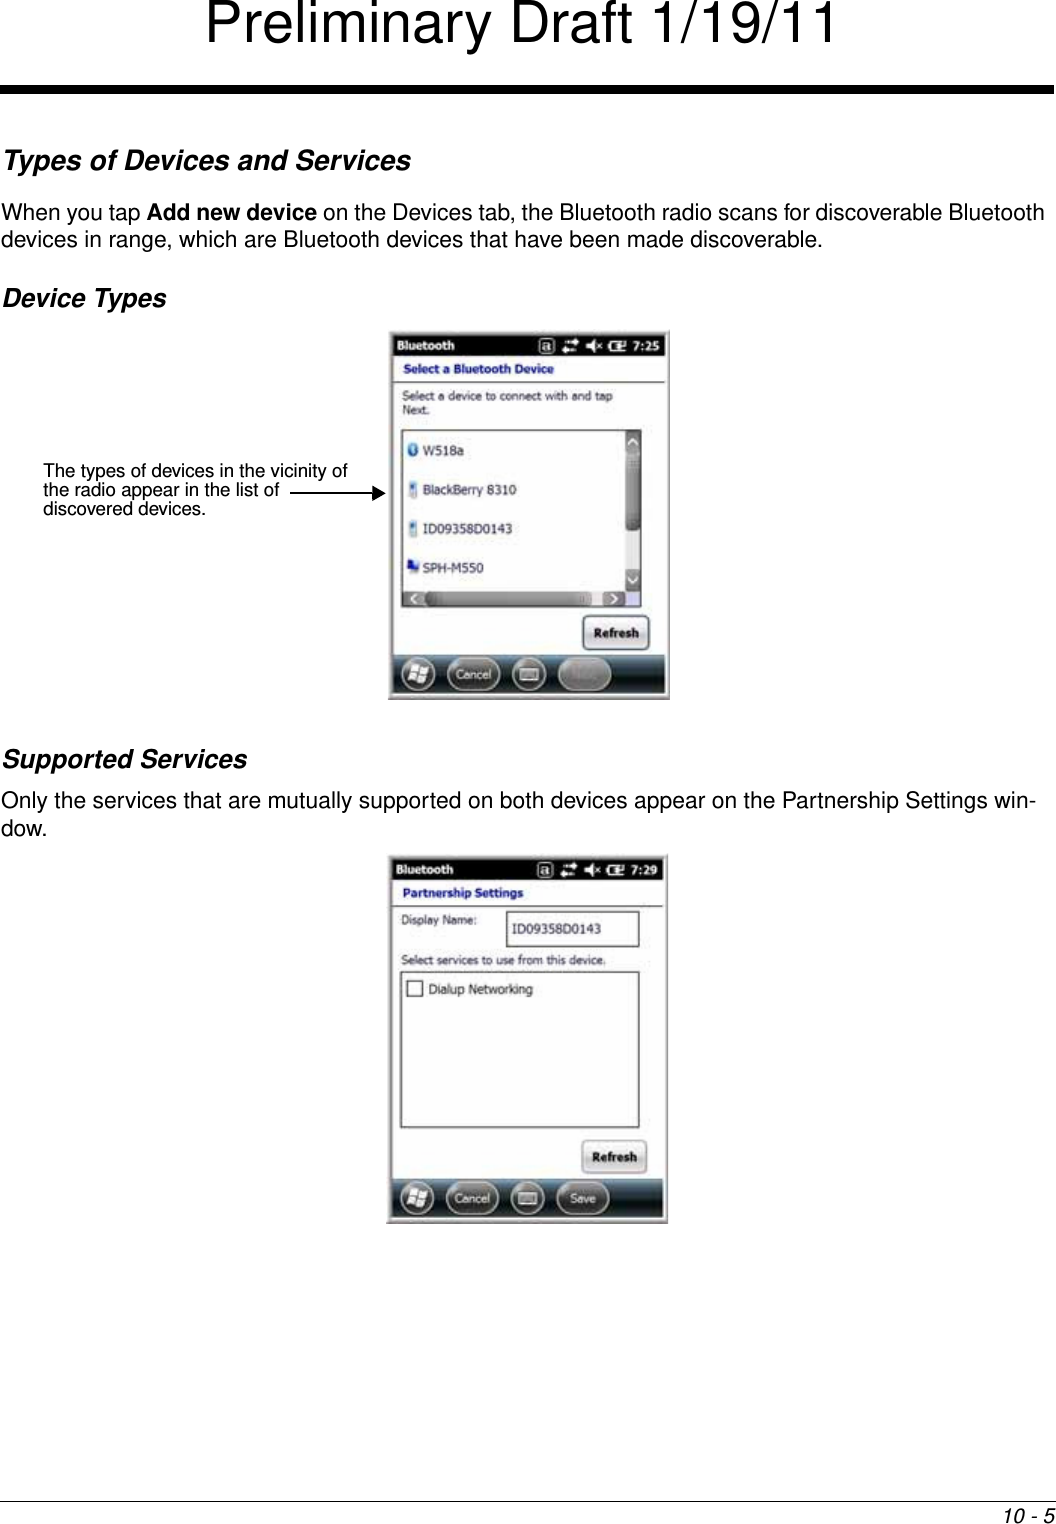 10 - 5Types of Devices and ServicesWhen you tap Add new device on the Devices tab, the Bluetooth radio scans for discoverable Bluetooth devices in range, which are Bluetooth devices that have been made discoverable.Device Types Supported ServicesOnly the services that are mutually supported on both devices appear on the Partnership Settings win-dow. The types of devices in the vicinity of the radio appear in the list of discovered devices.Preliminary Draft 1/19/11